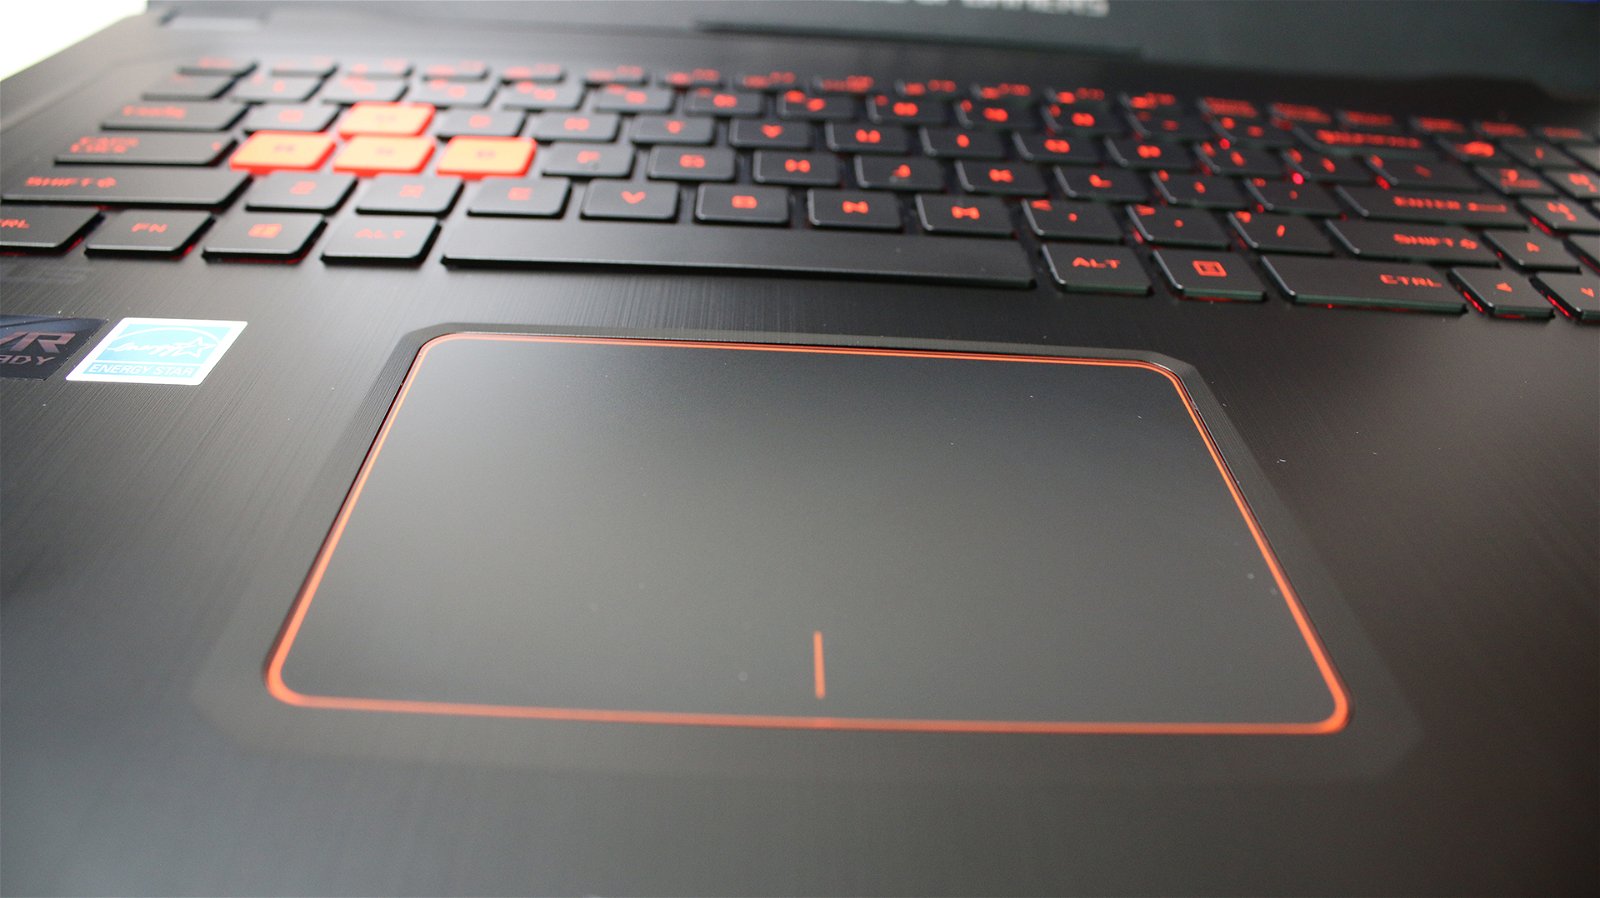 Asus Gl702M Gaming Notebook (Hardware) Review 11